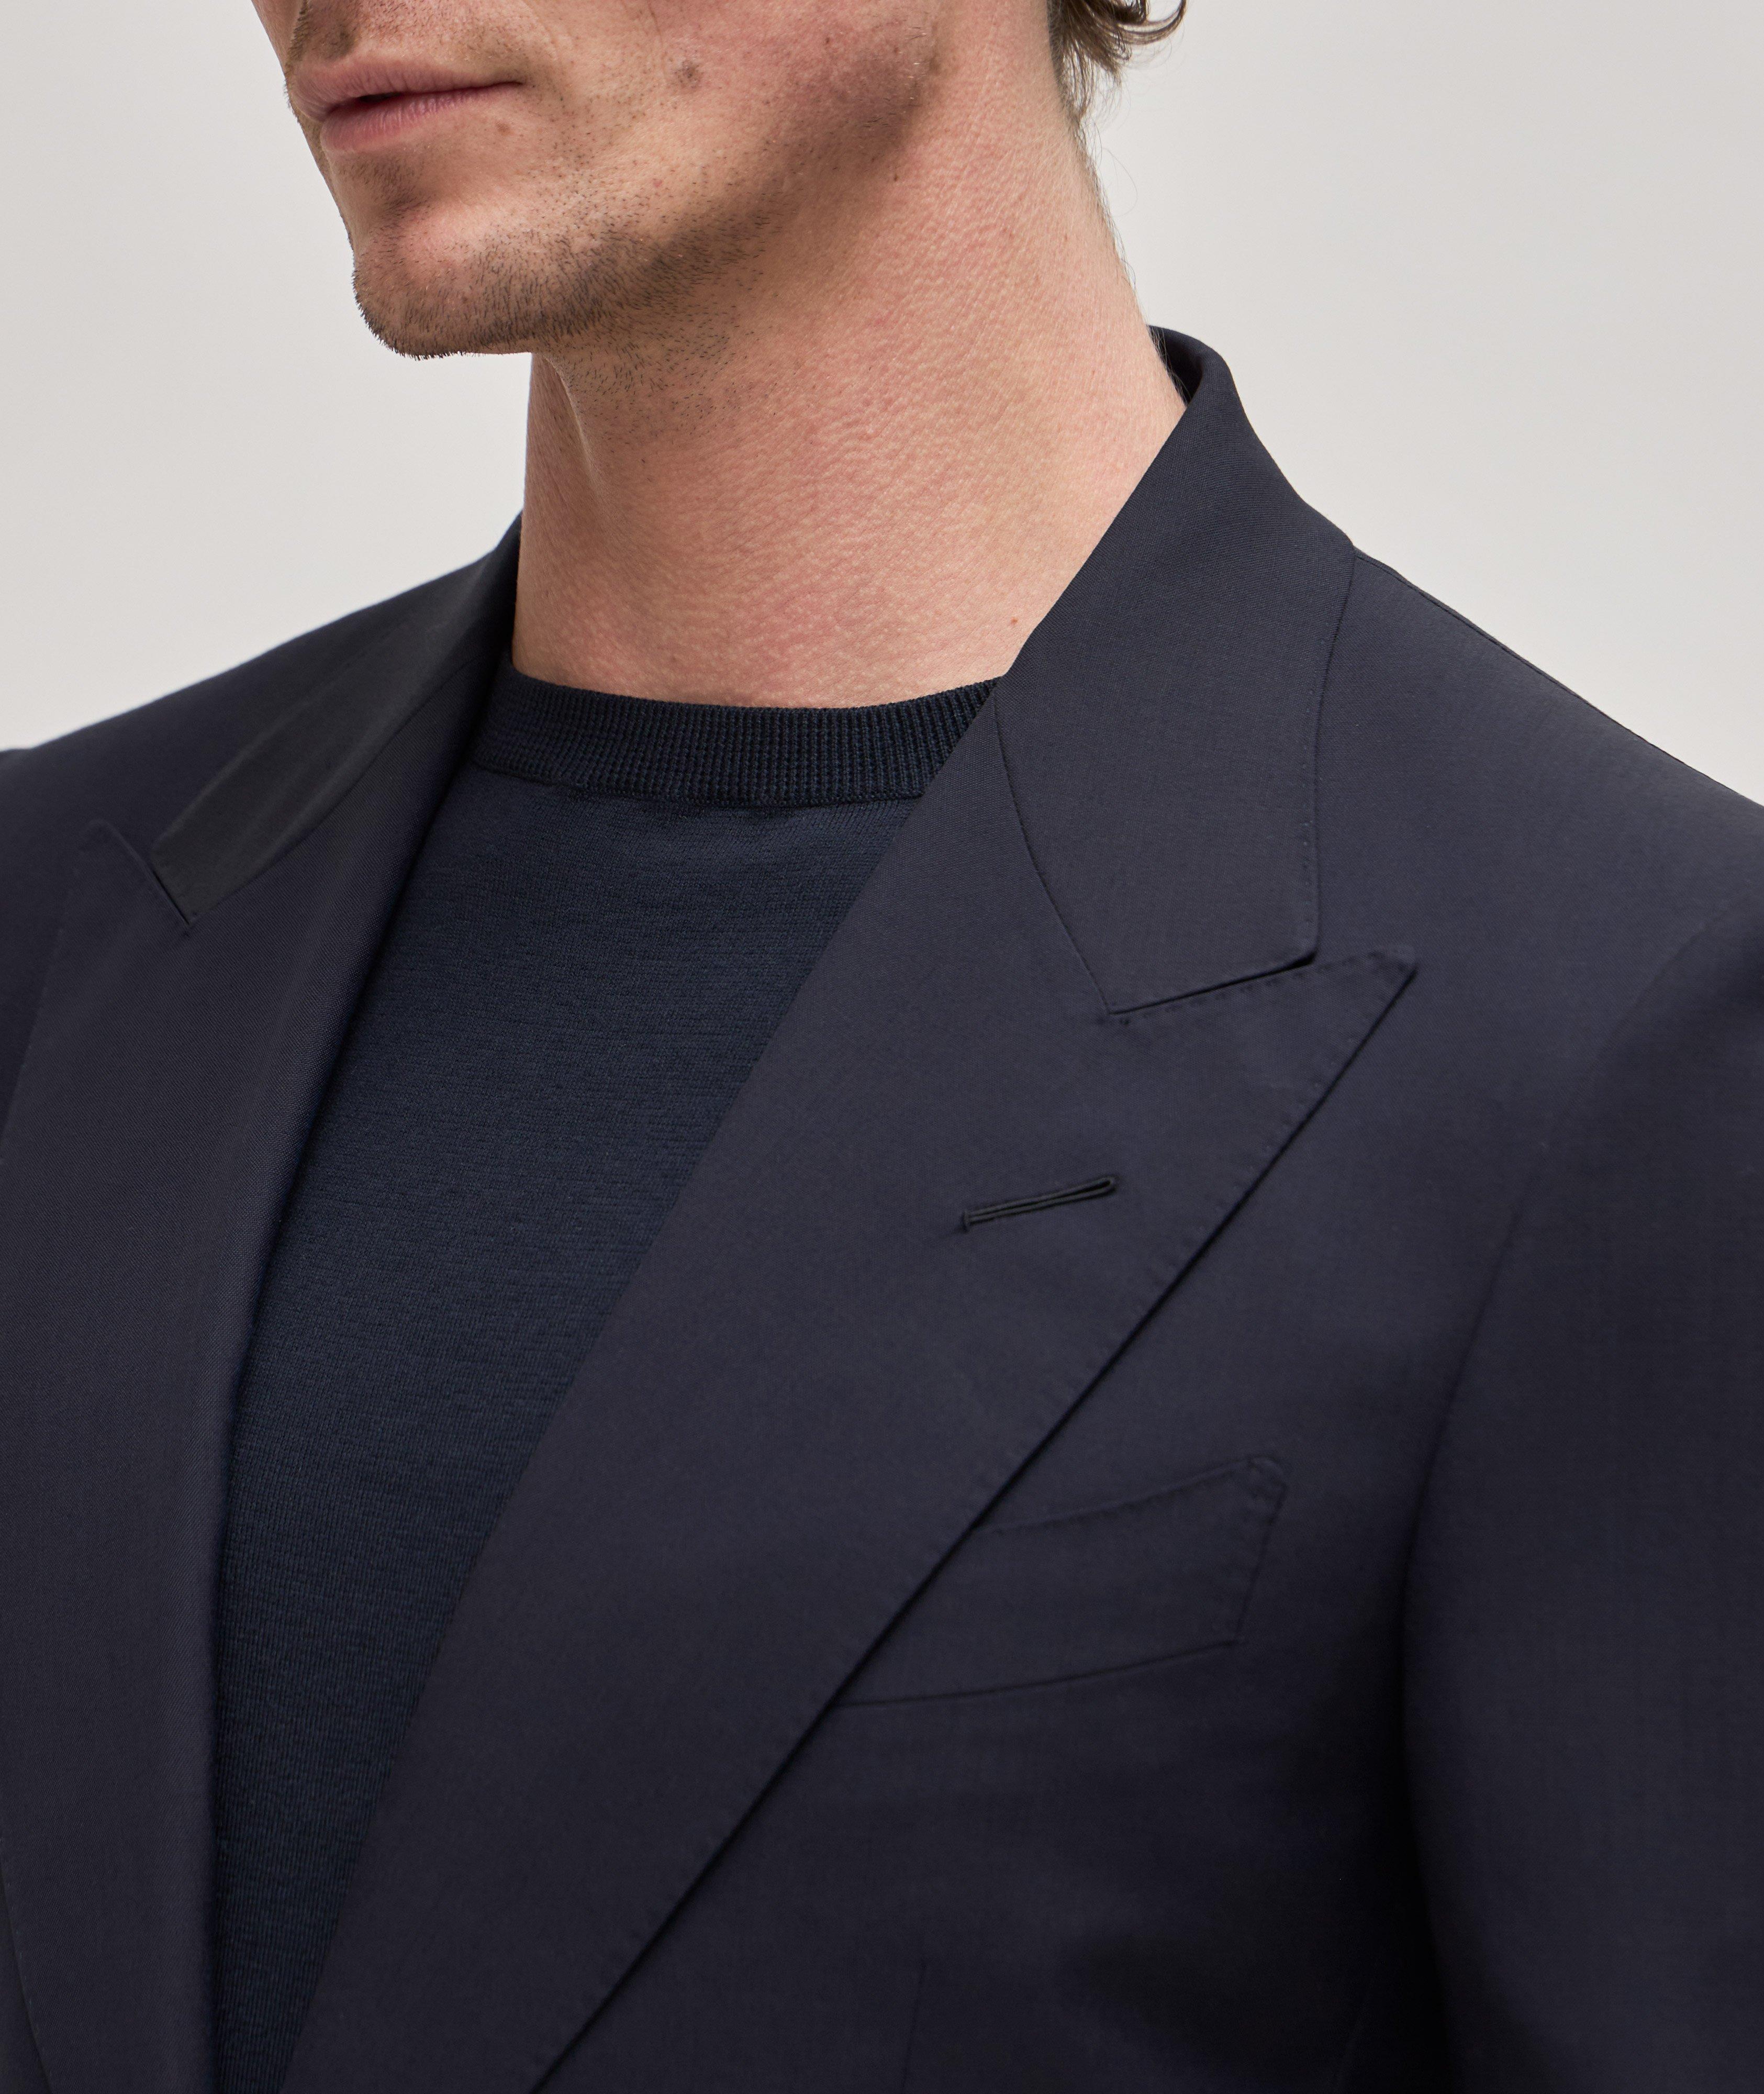 Shelton Solid Wool Suit image 3